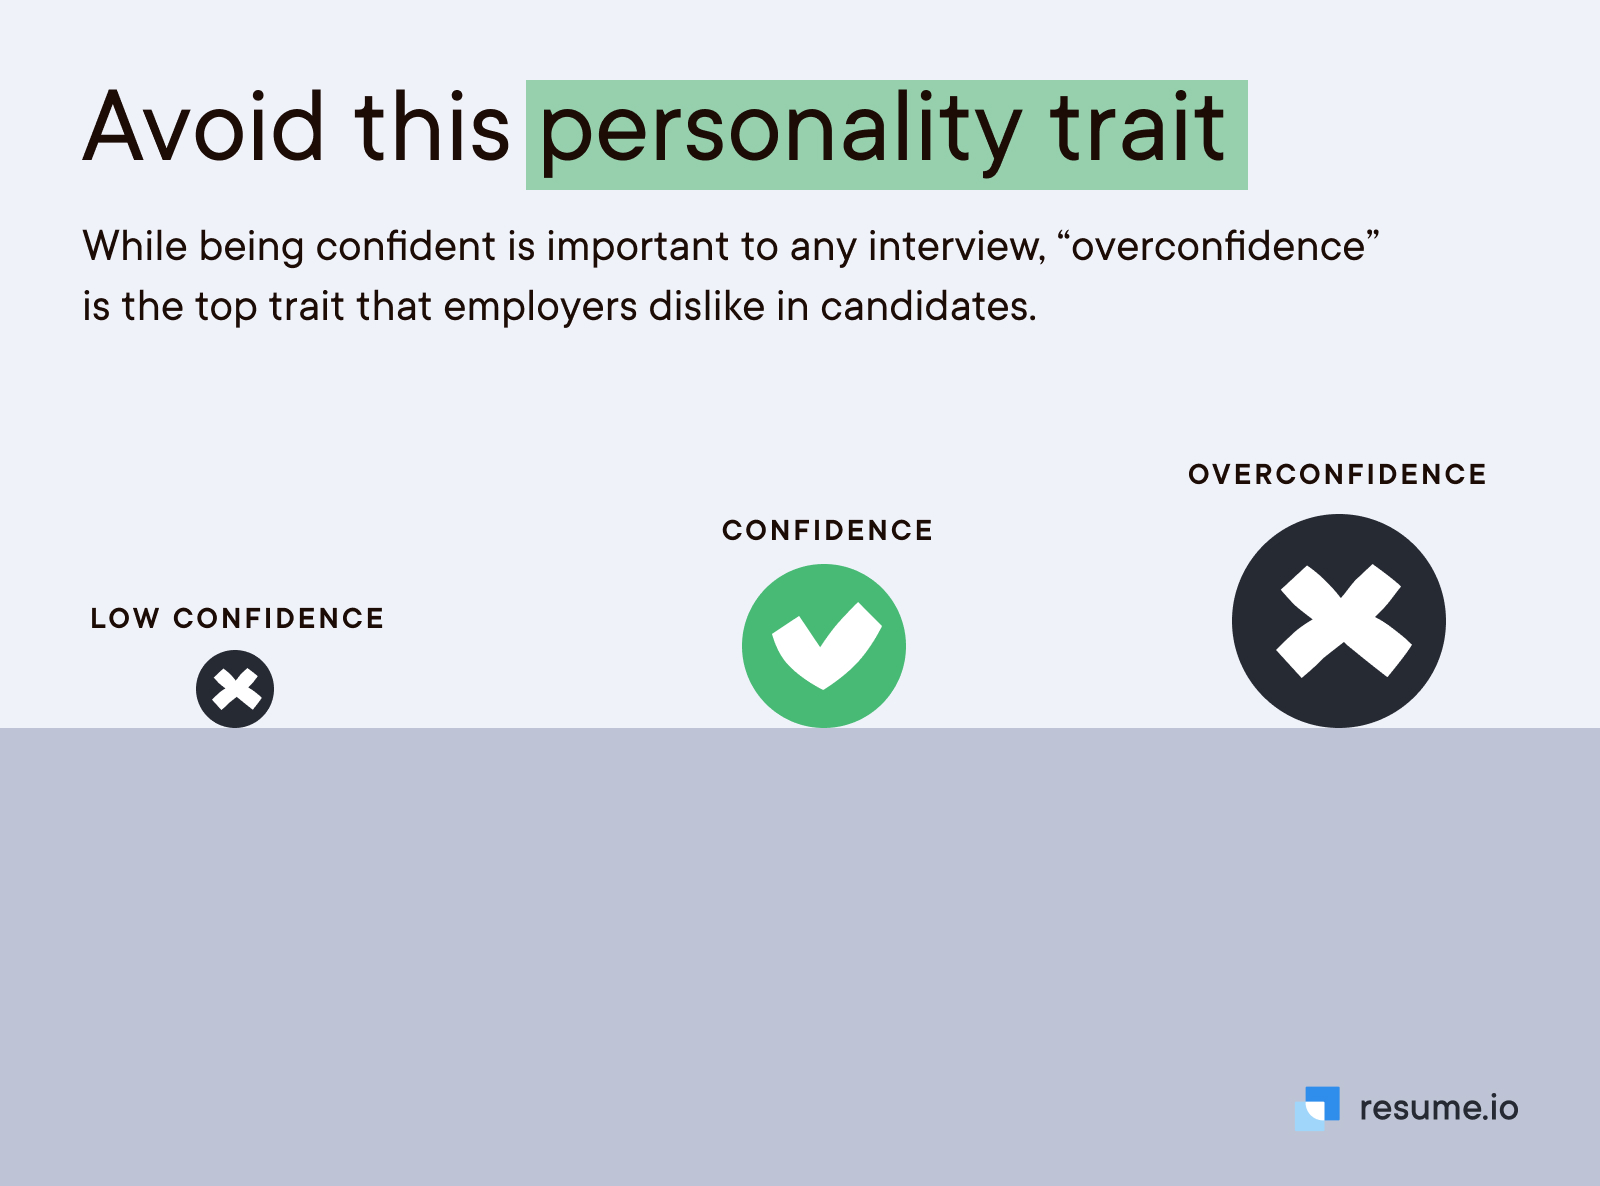 Avoid this personality trait